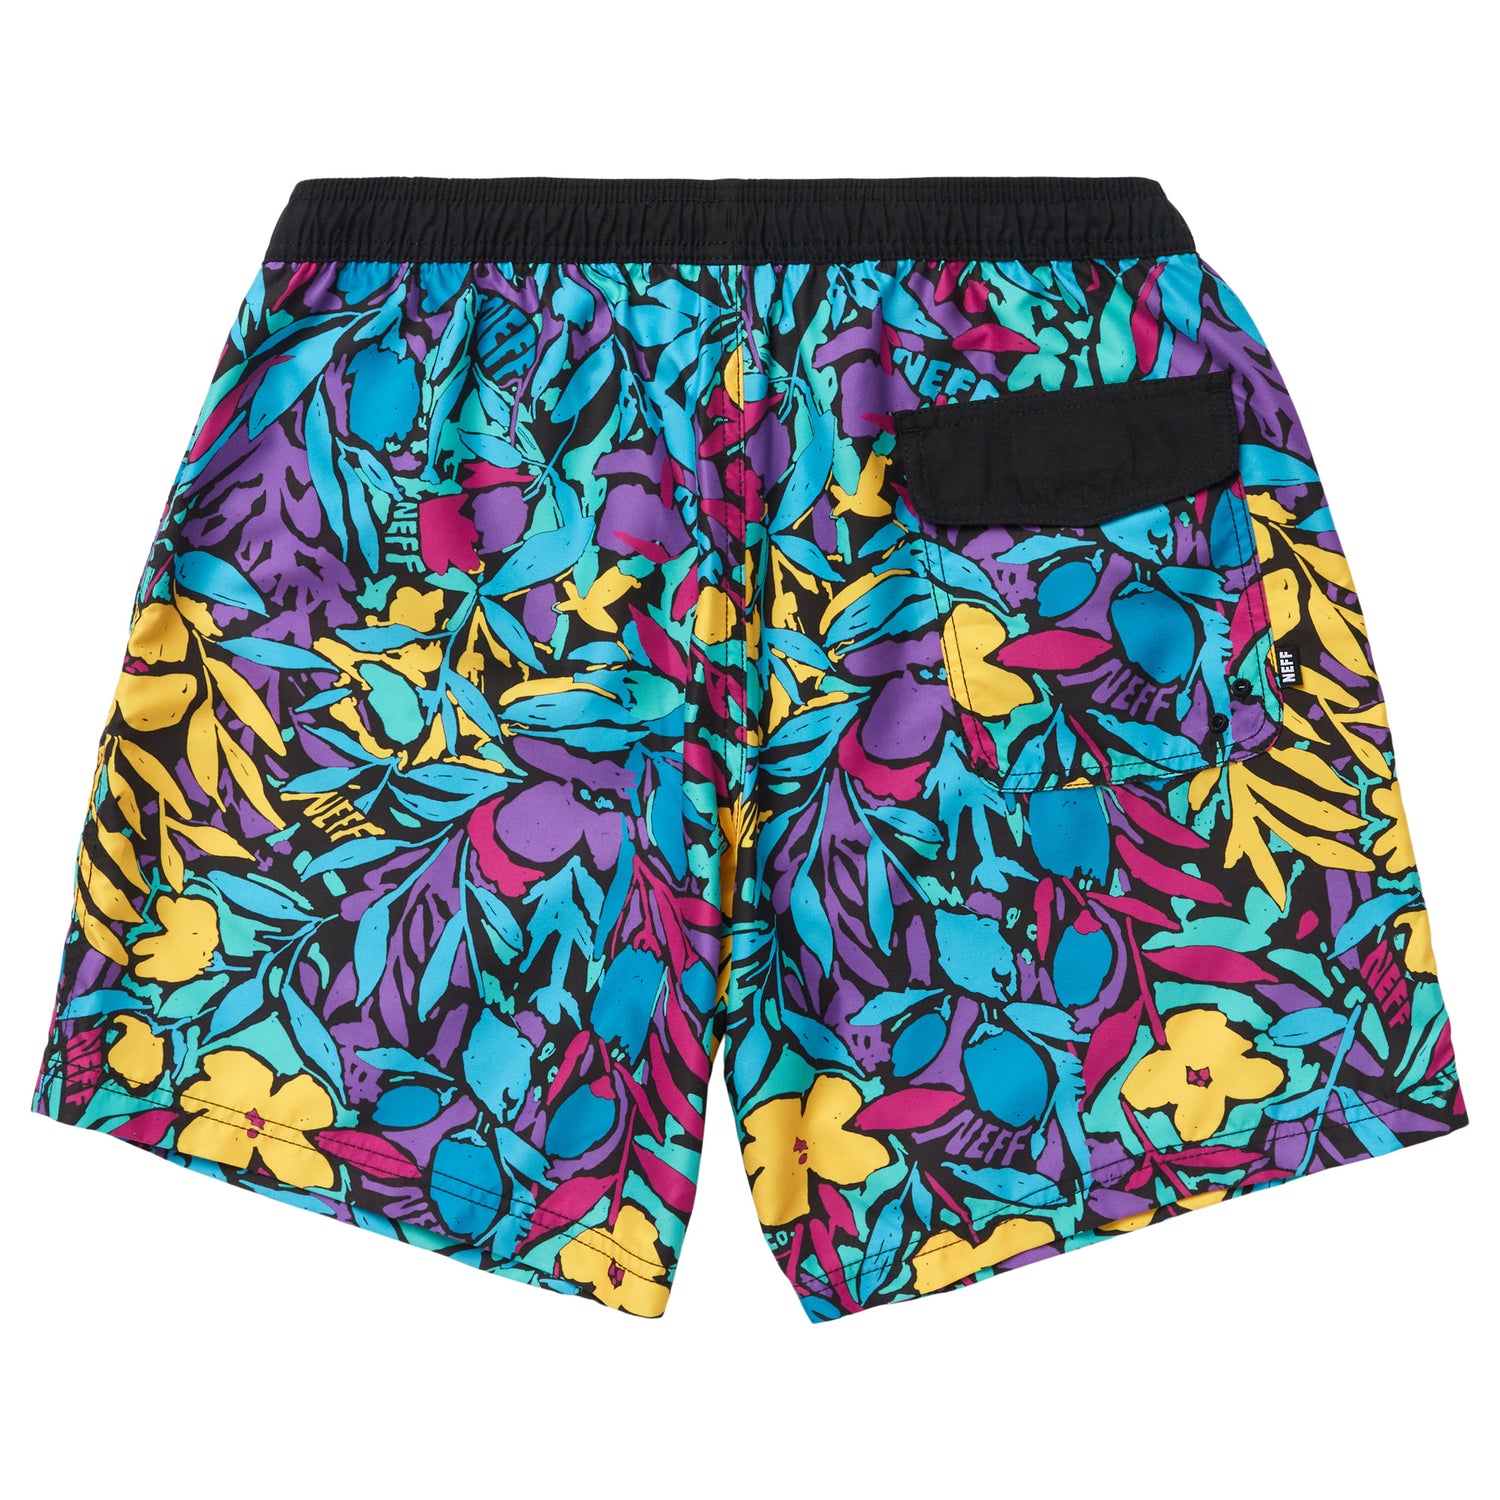 WITHIN THE WEEDS 17" HOT TUB VOLLEY SHORTS - MULTI